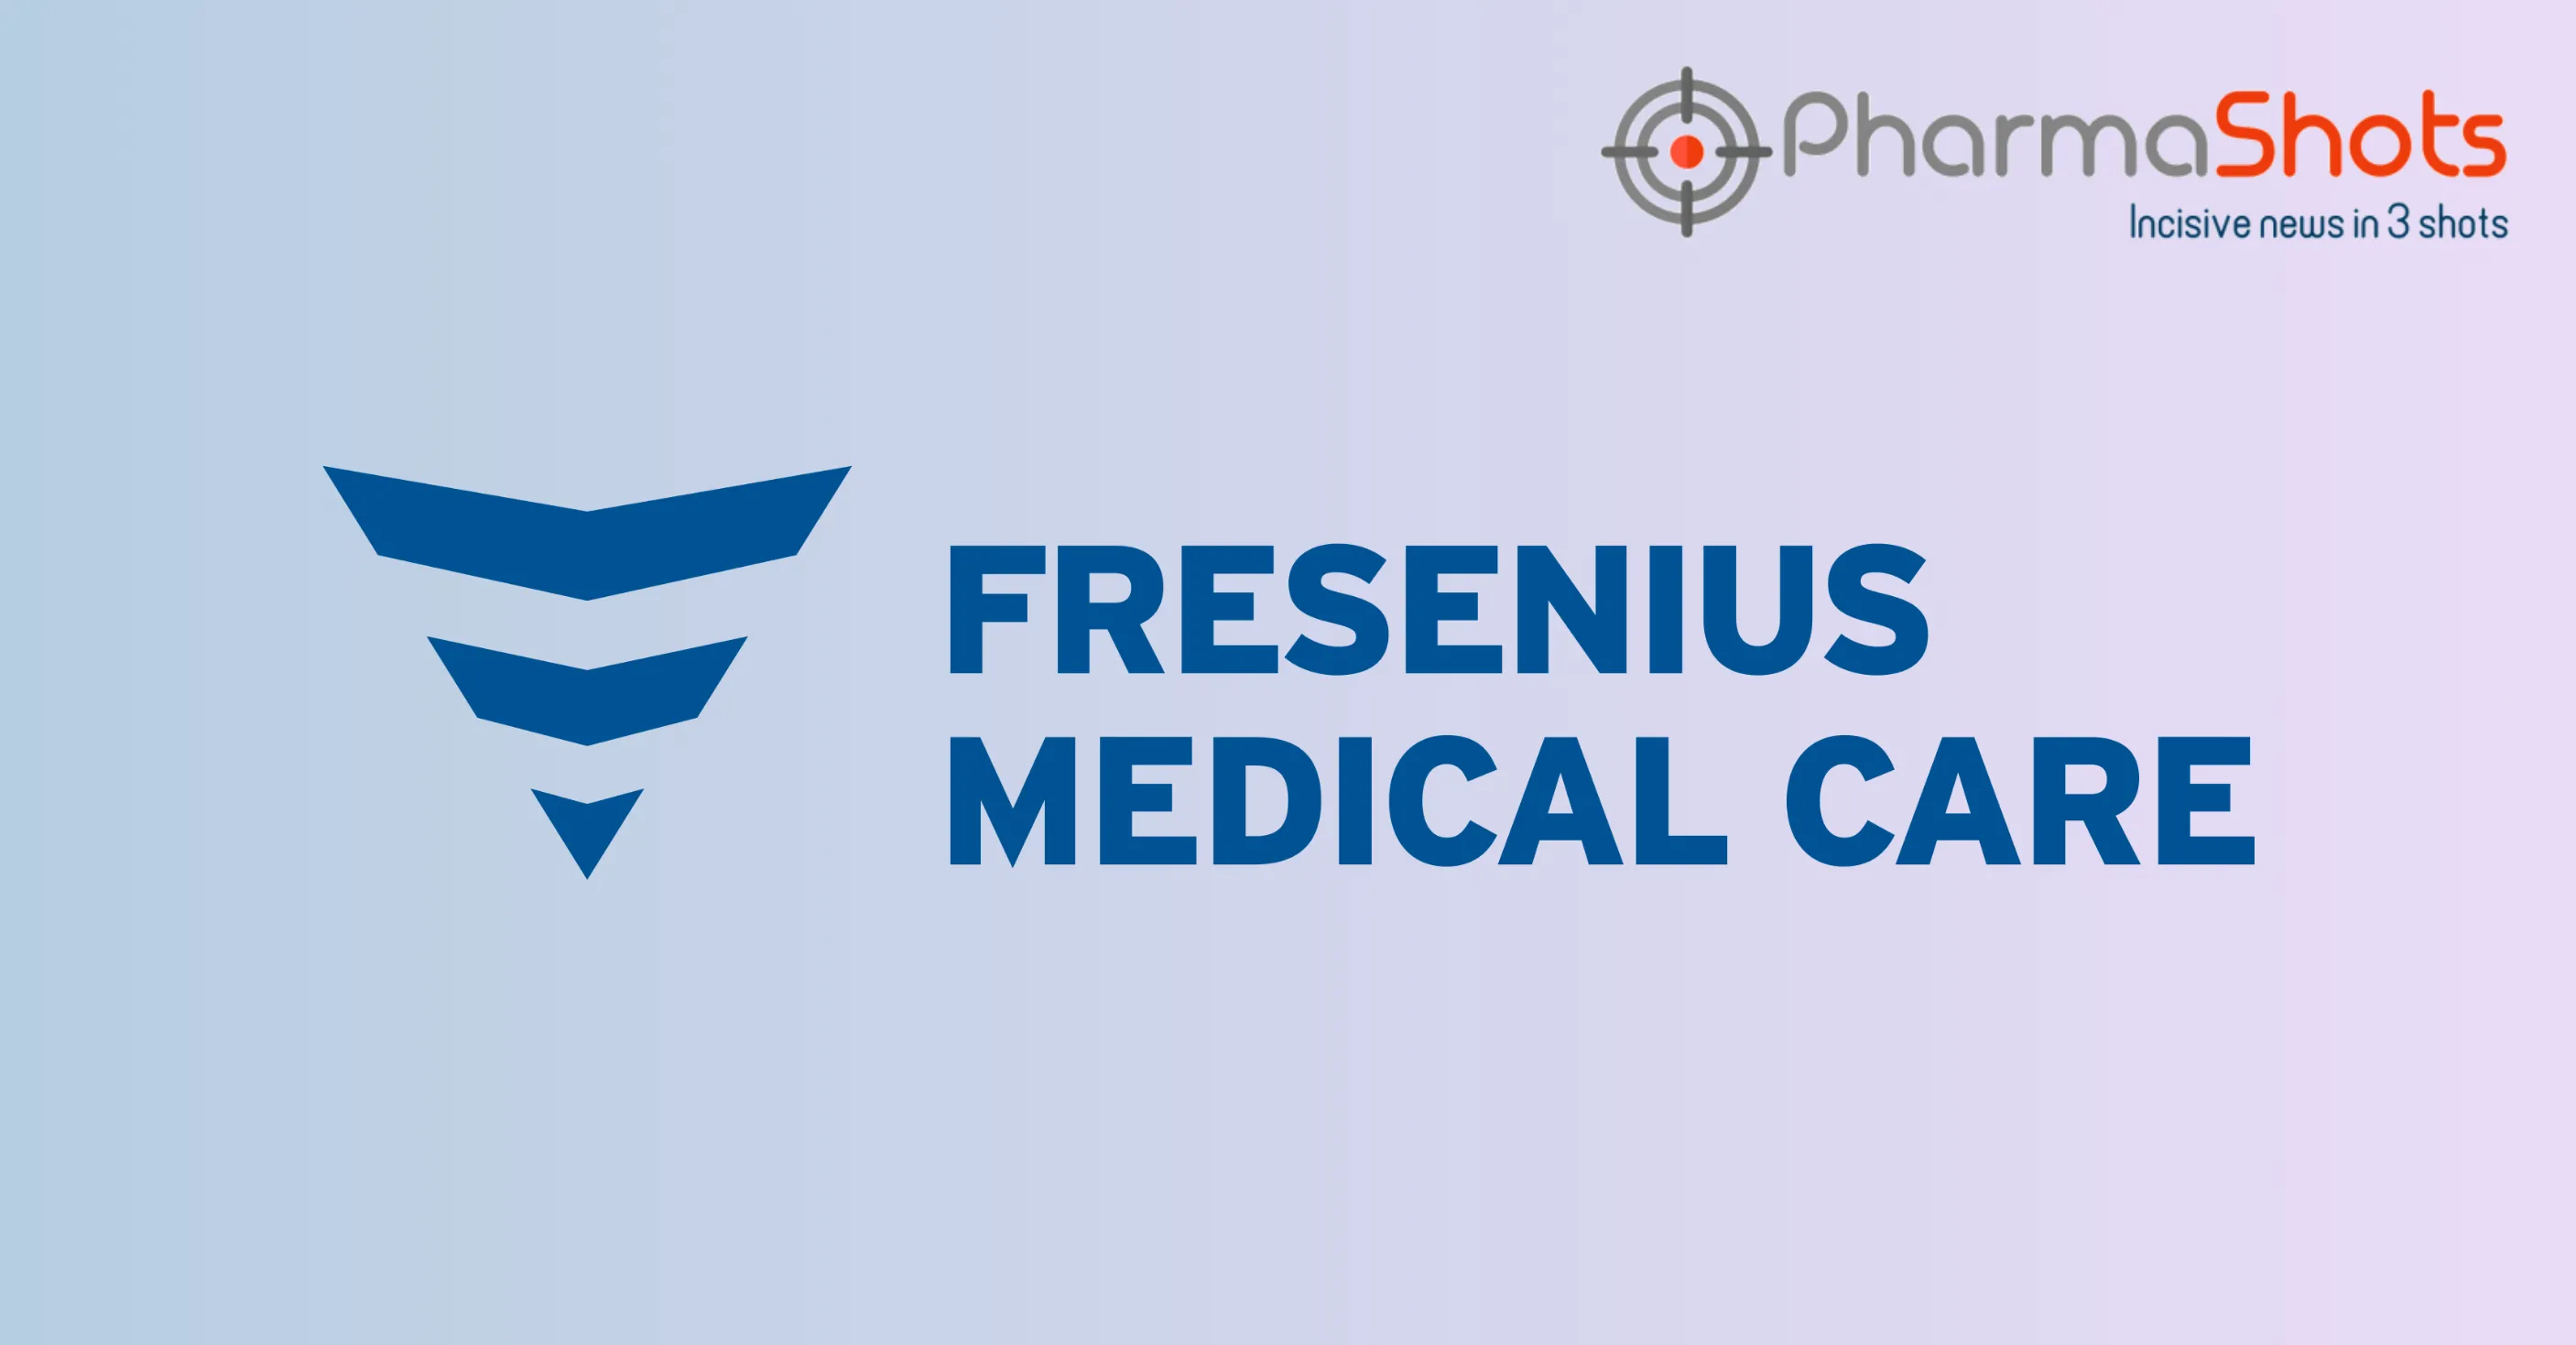 Fresenius Medical Care’s 5008X Hemodialysis System Receives the US FDA’s 510(k) Clearance as a Dialysis Therapy for Kidney Disease Patients